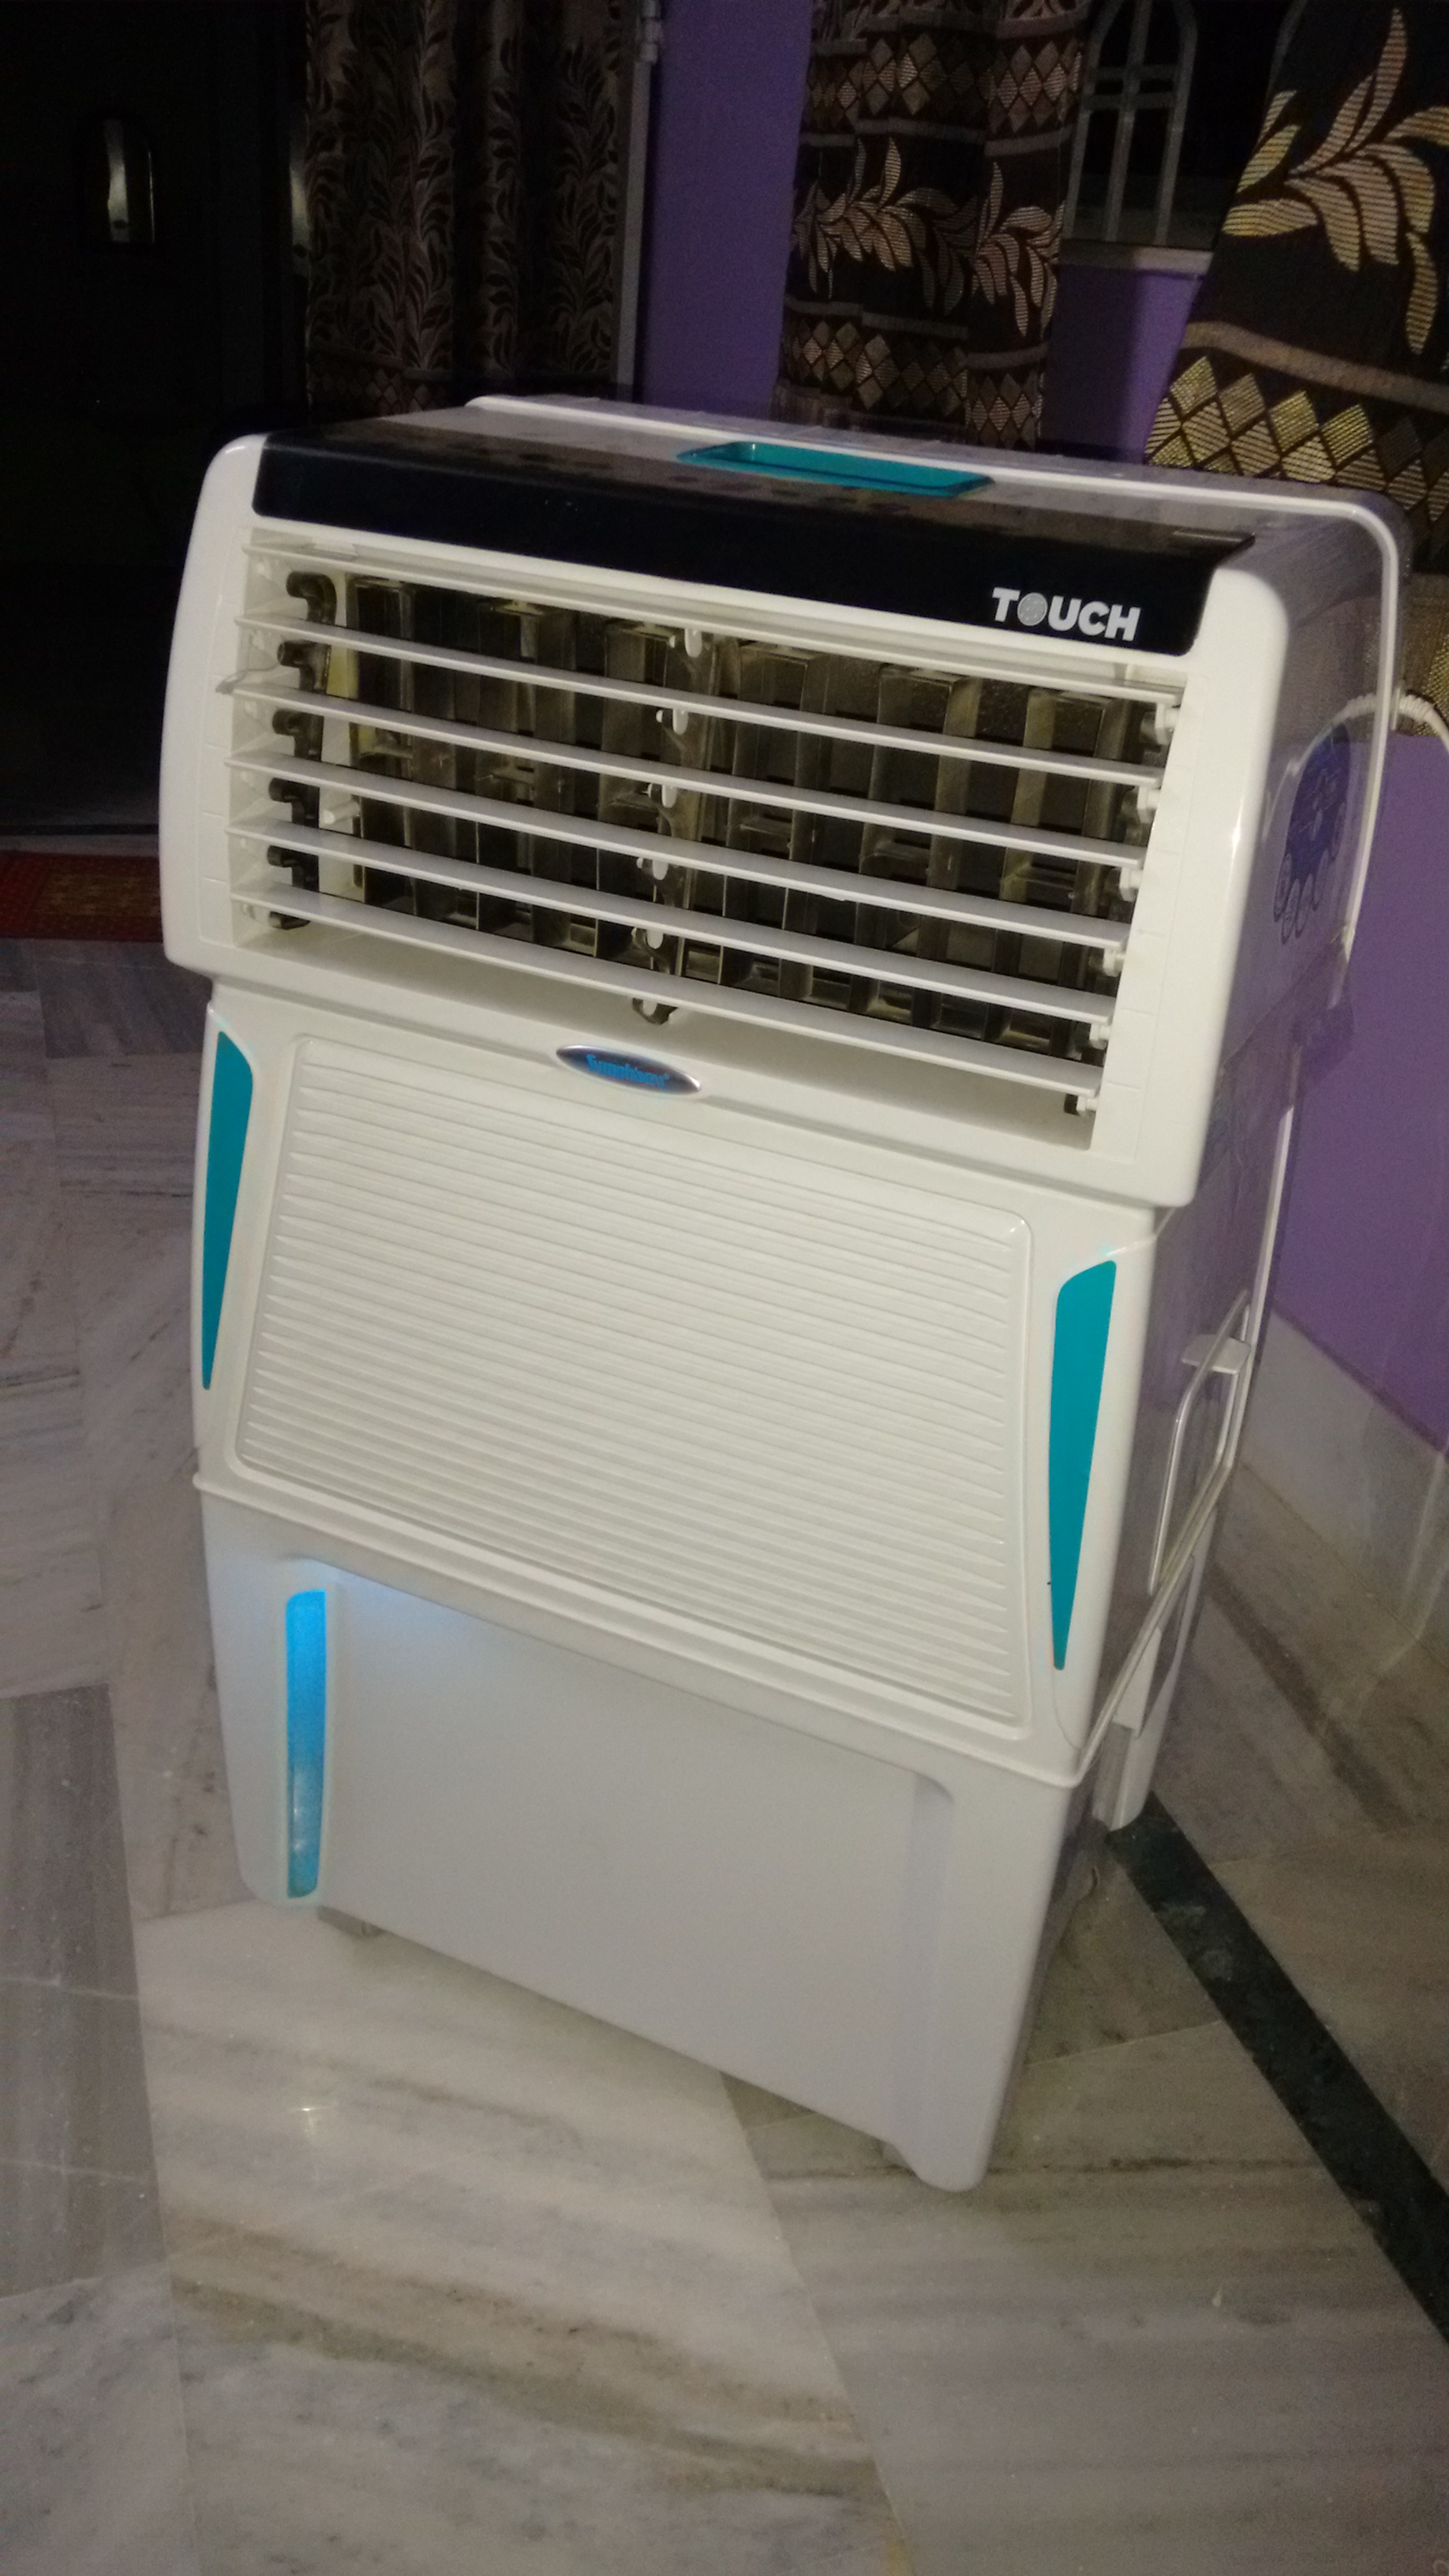 symphony touch cooler